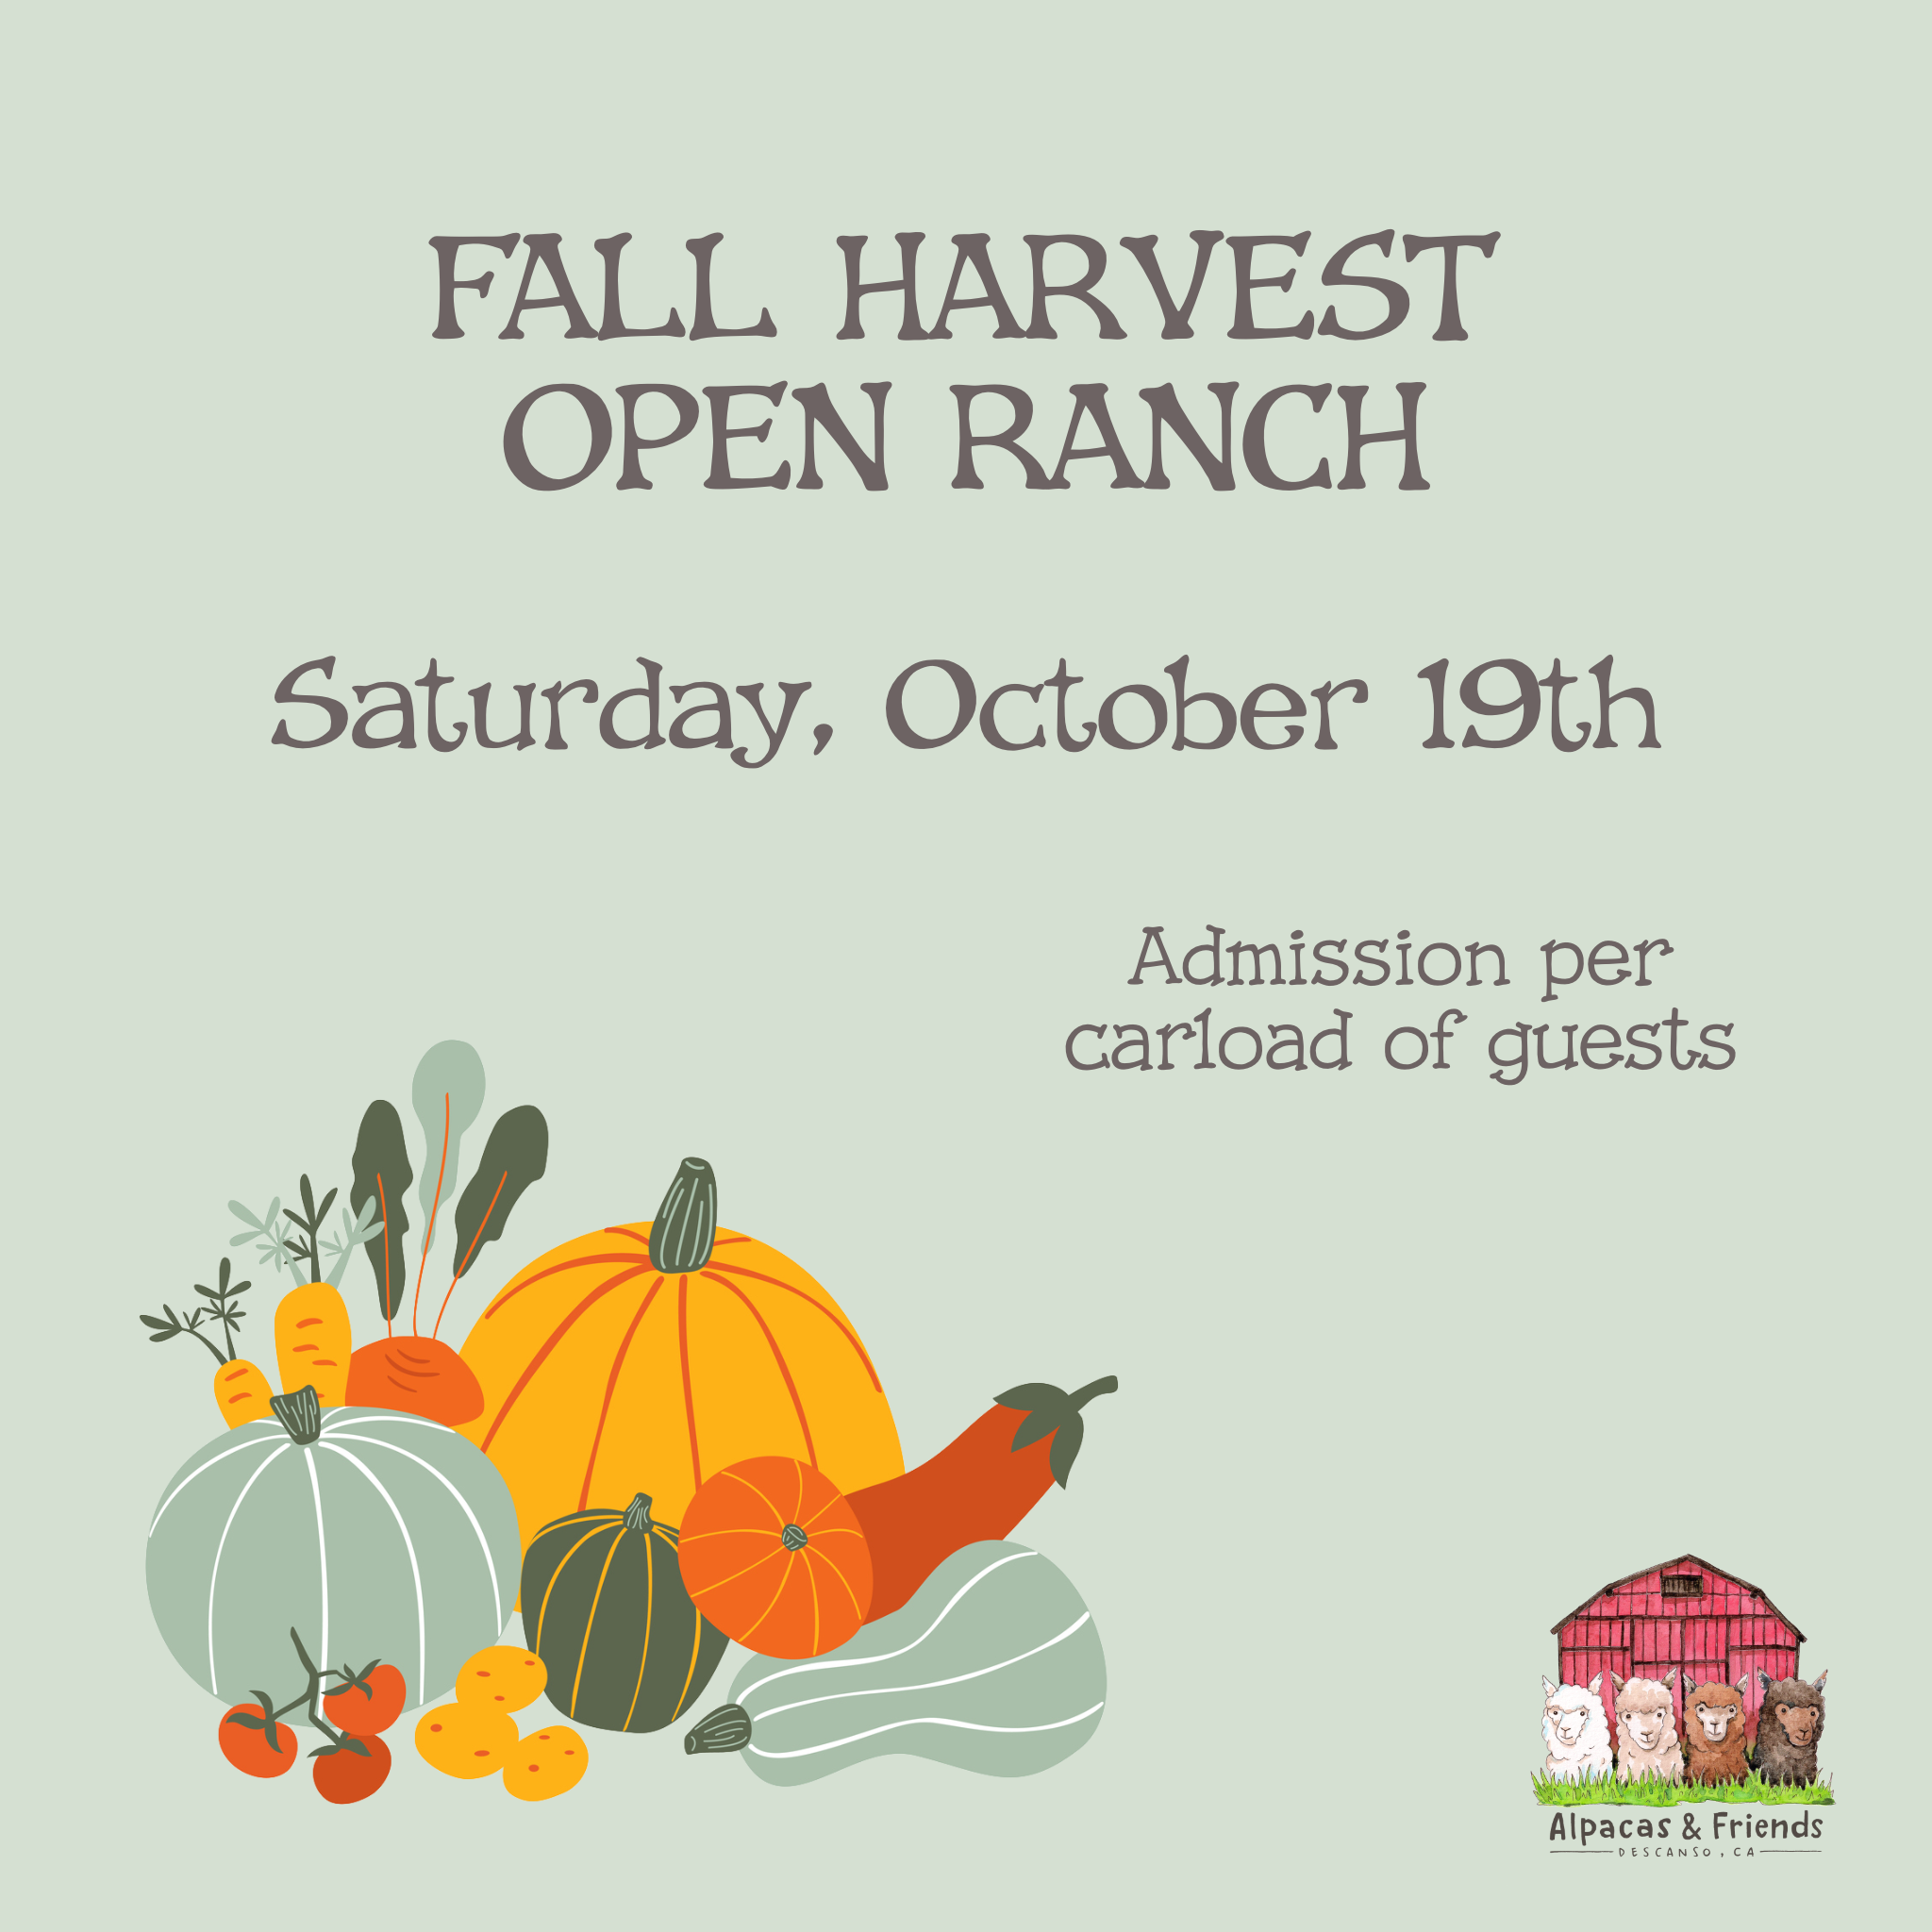 Fall Harvest Open Ranch Reservation